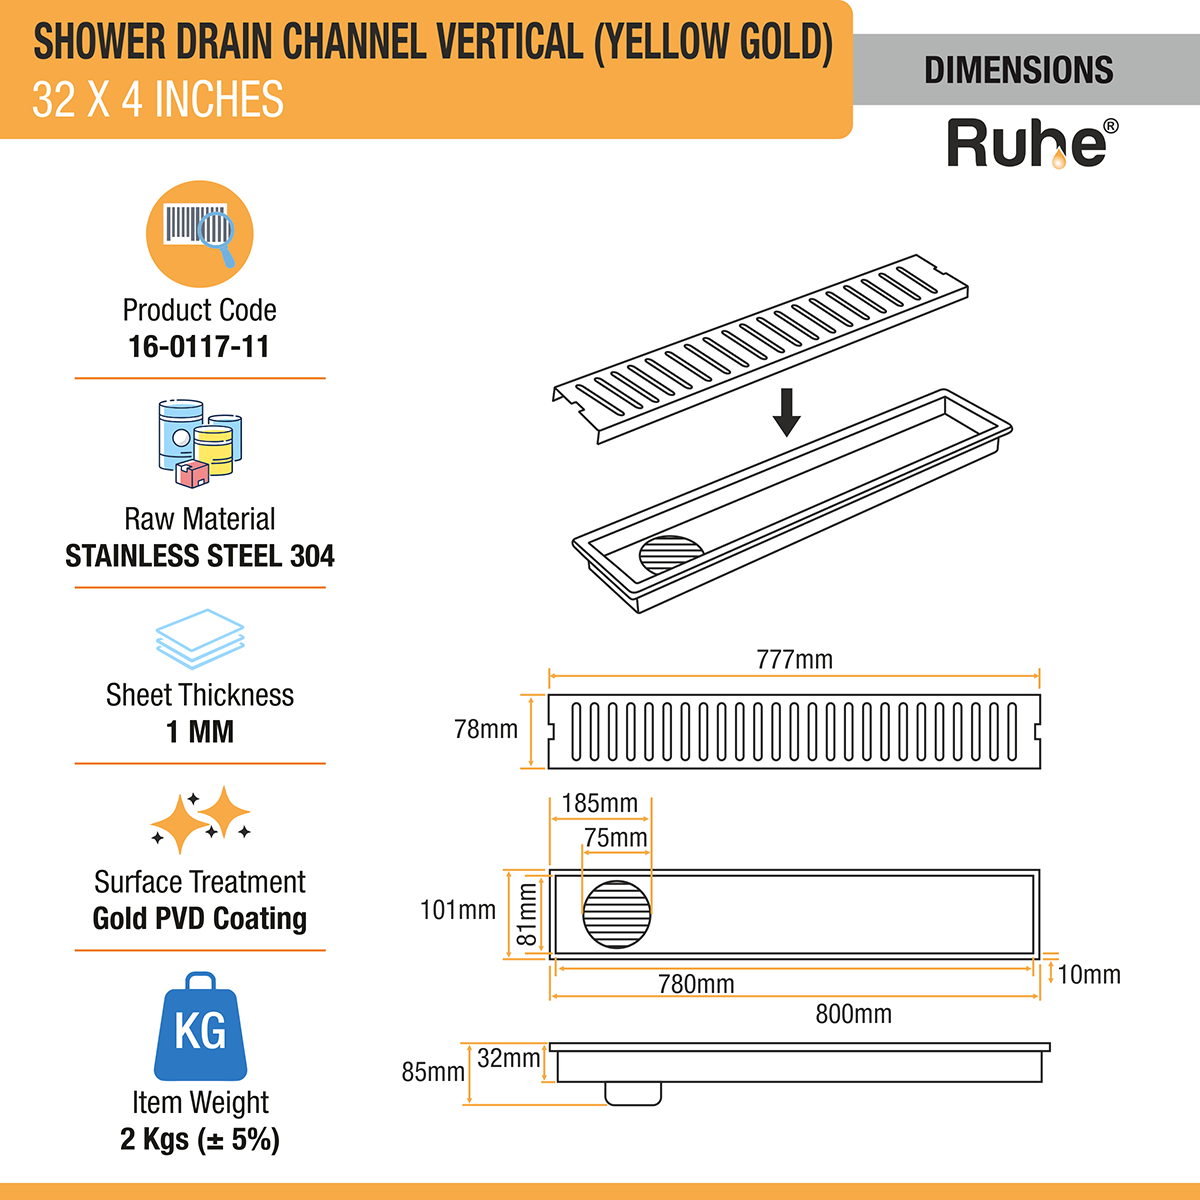 Vertical Shower Drain Channel (32 x 4 Inches) YELLOW GOLD dimensions and size